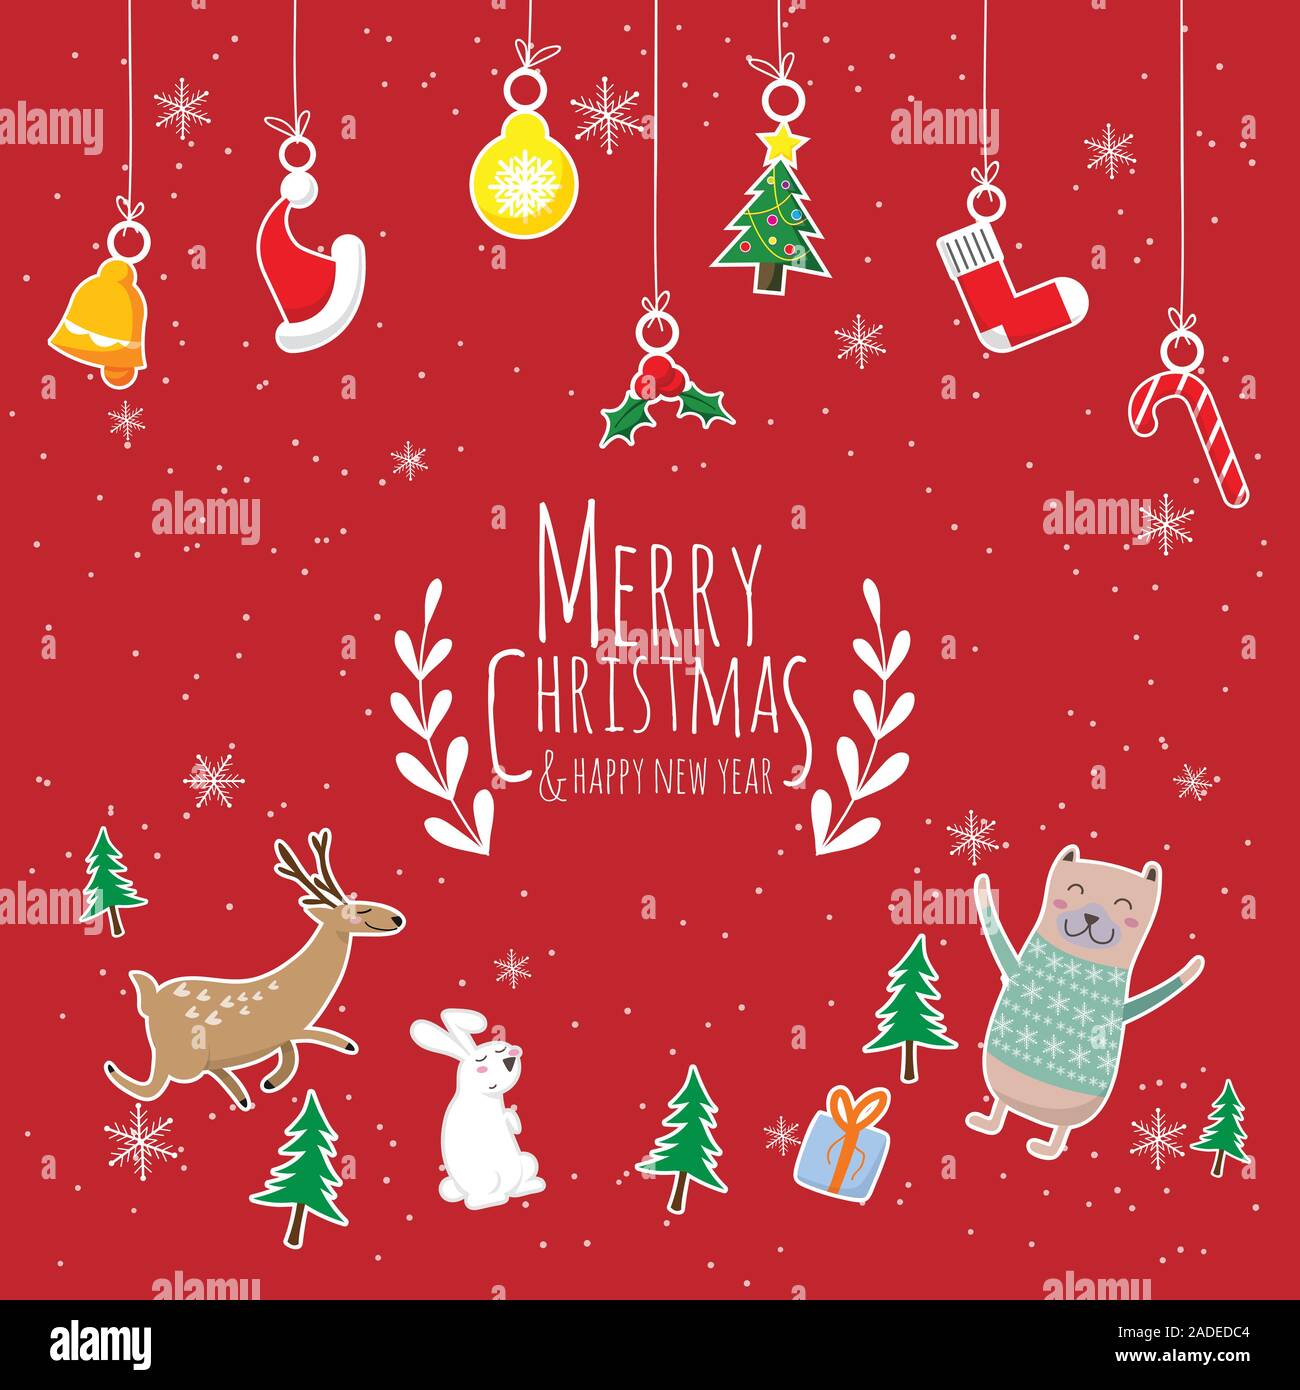 Merry Christmas & Happy New year. cute cartoon of animals character , christmas tree and gift box with text Merry Christmas hanging Christmas ornament Stock Vector